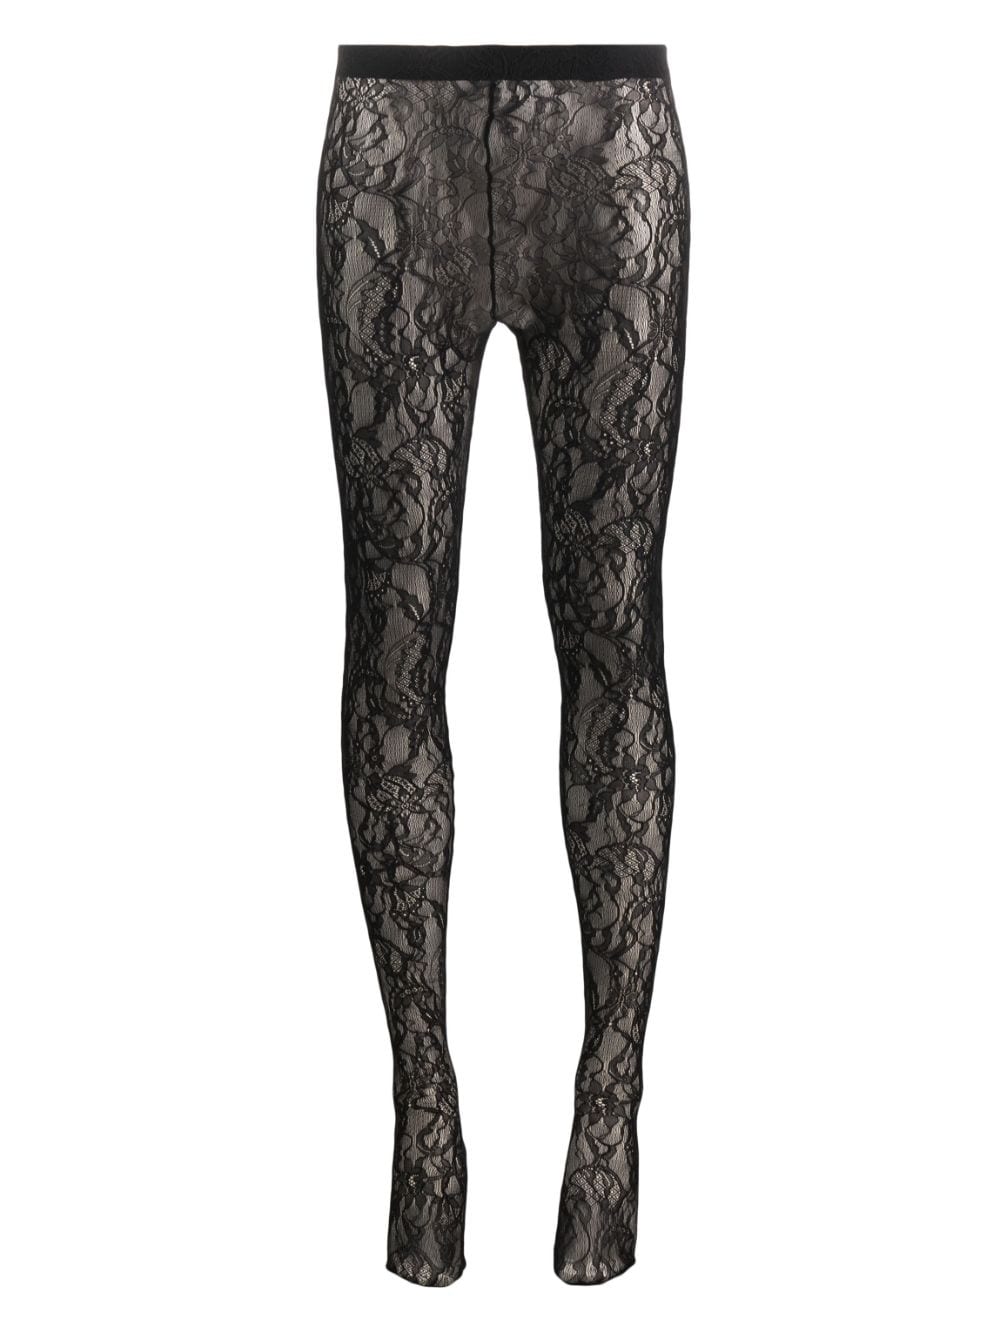 corded lace tights